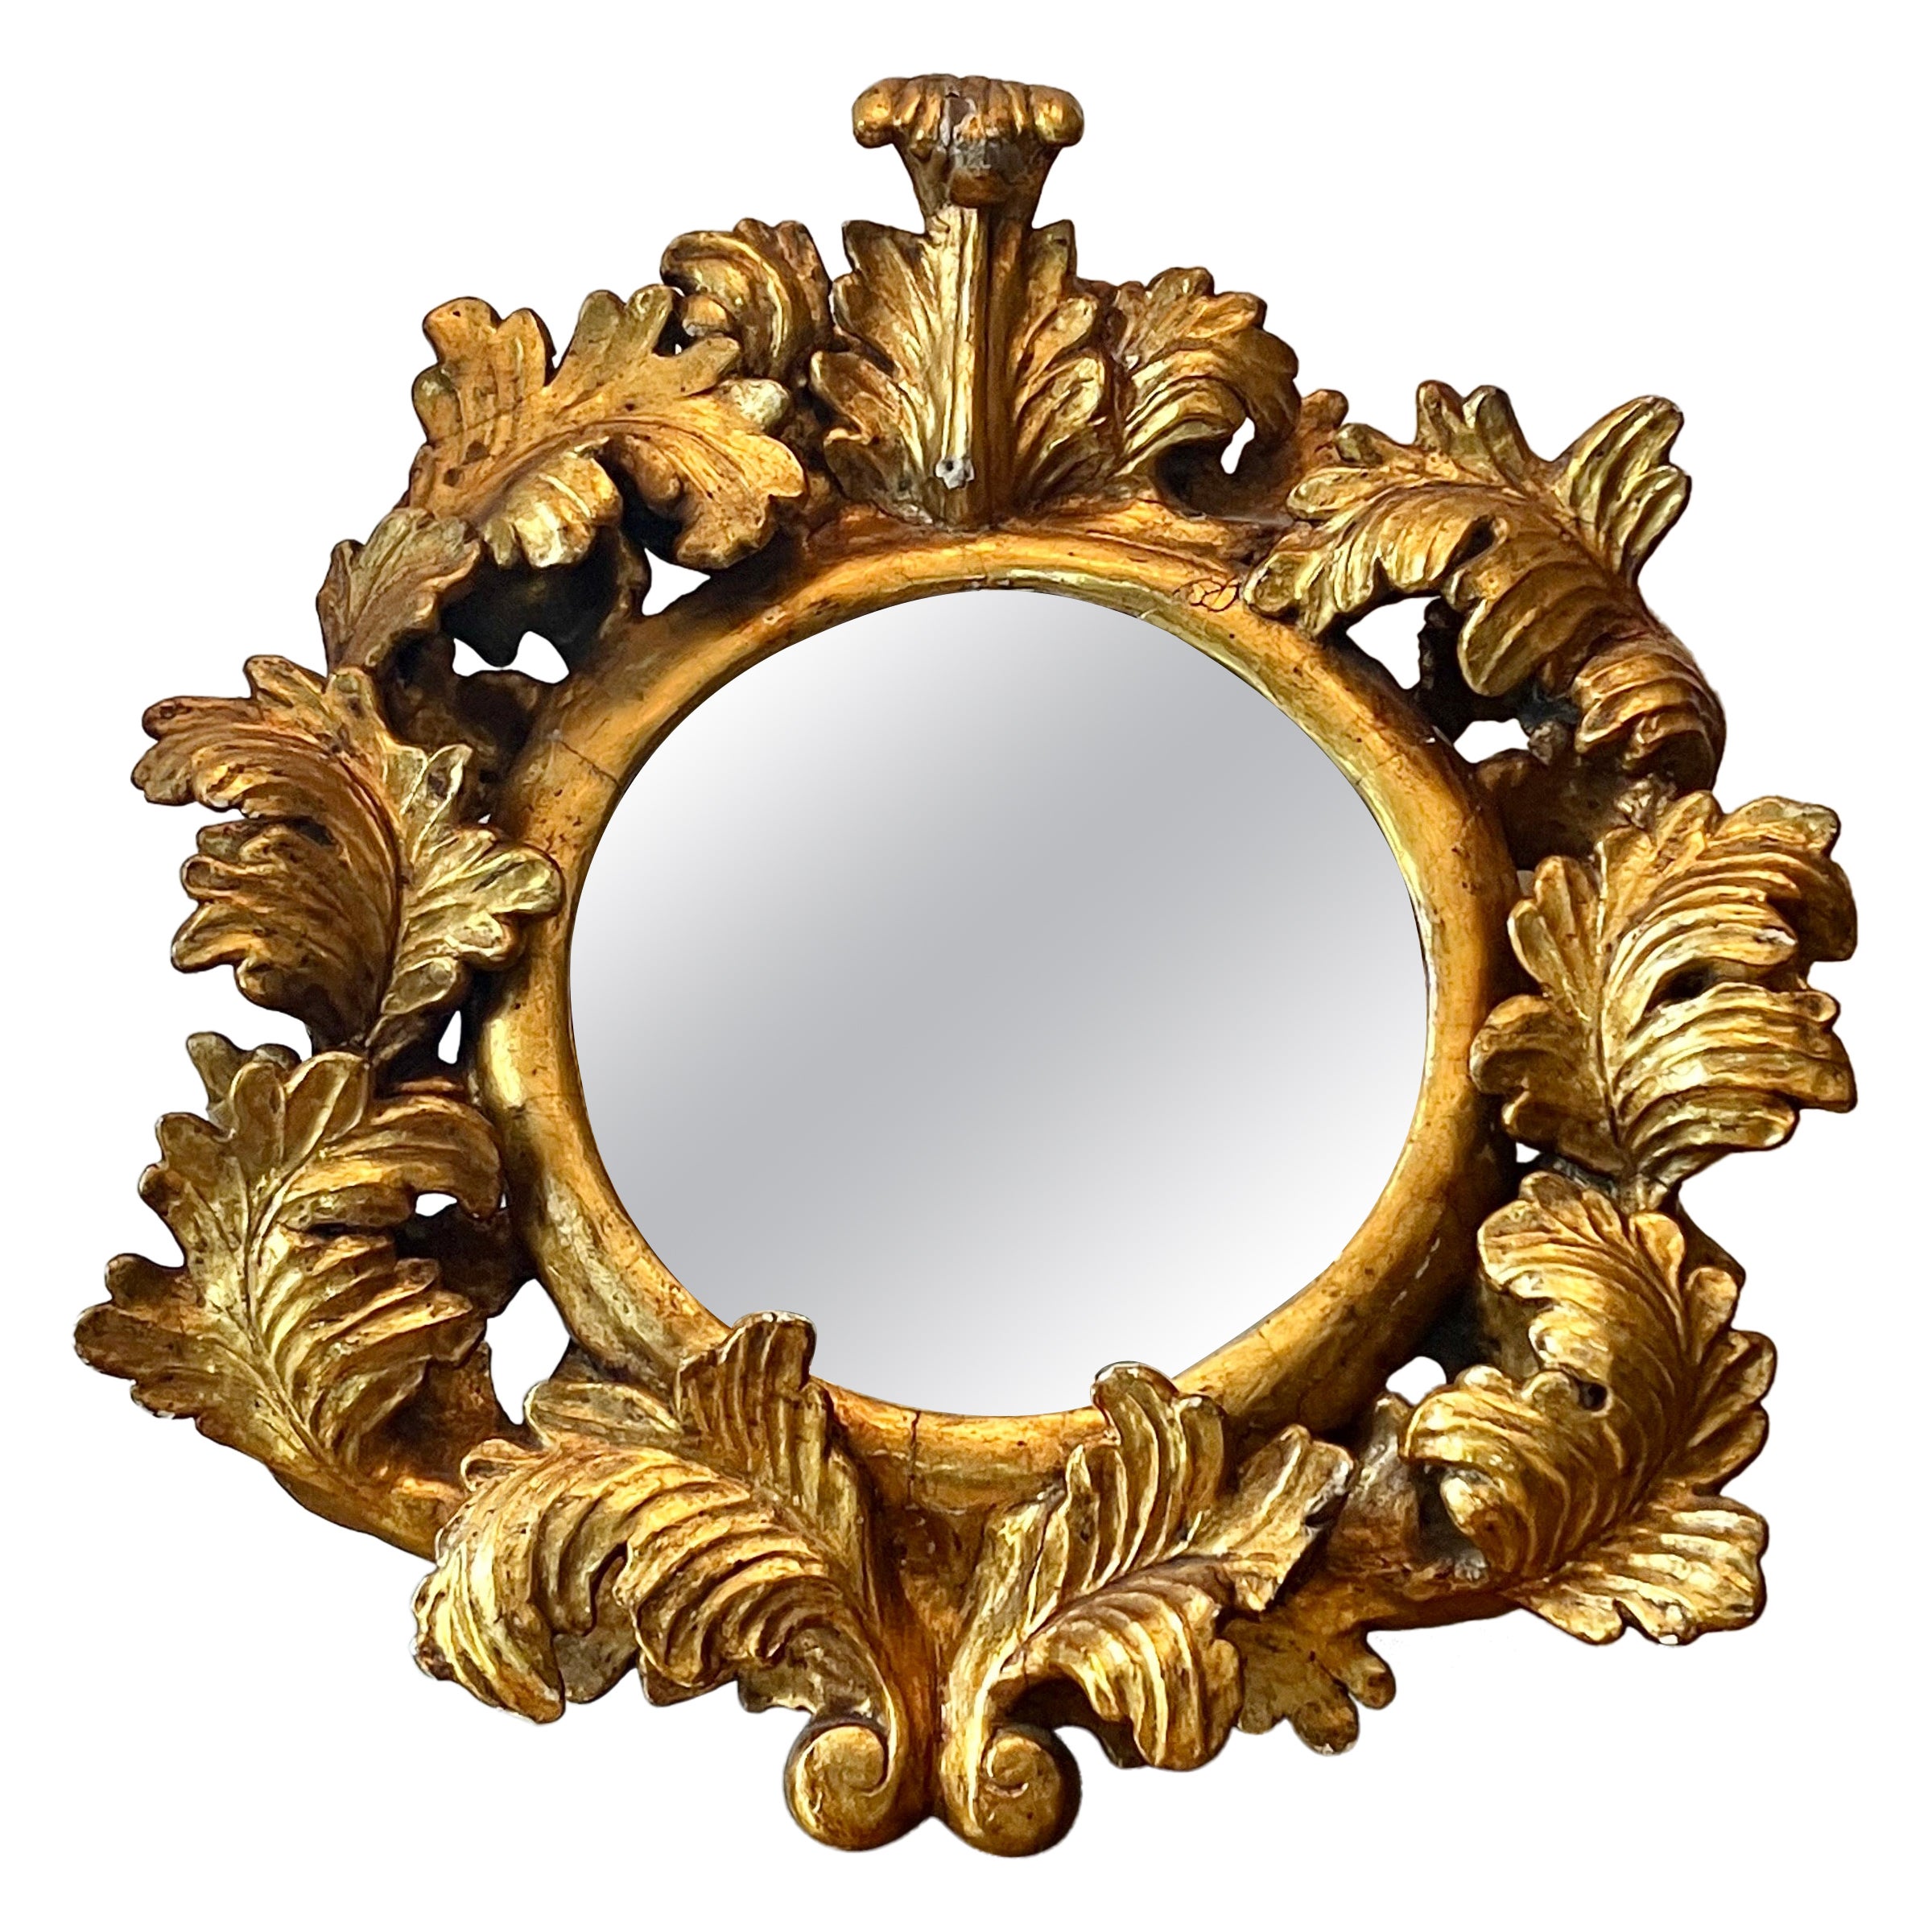 Italian Baroque Round Gilded Wood Mirror, Sicily 18th C For Sale